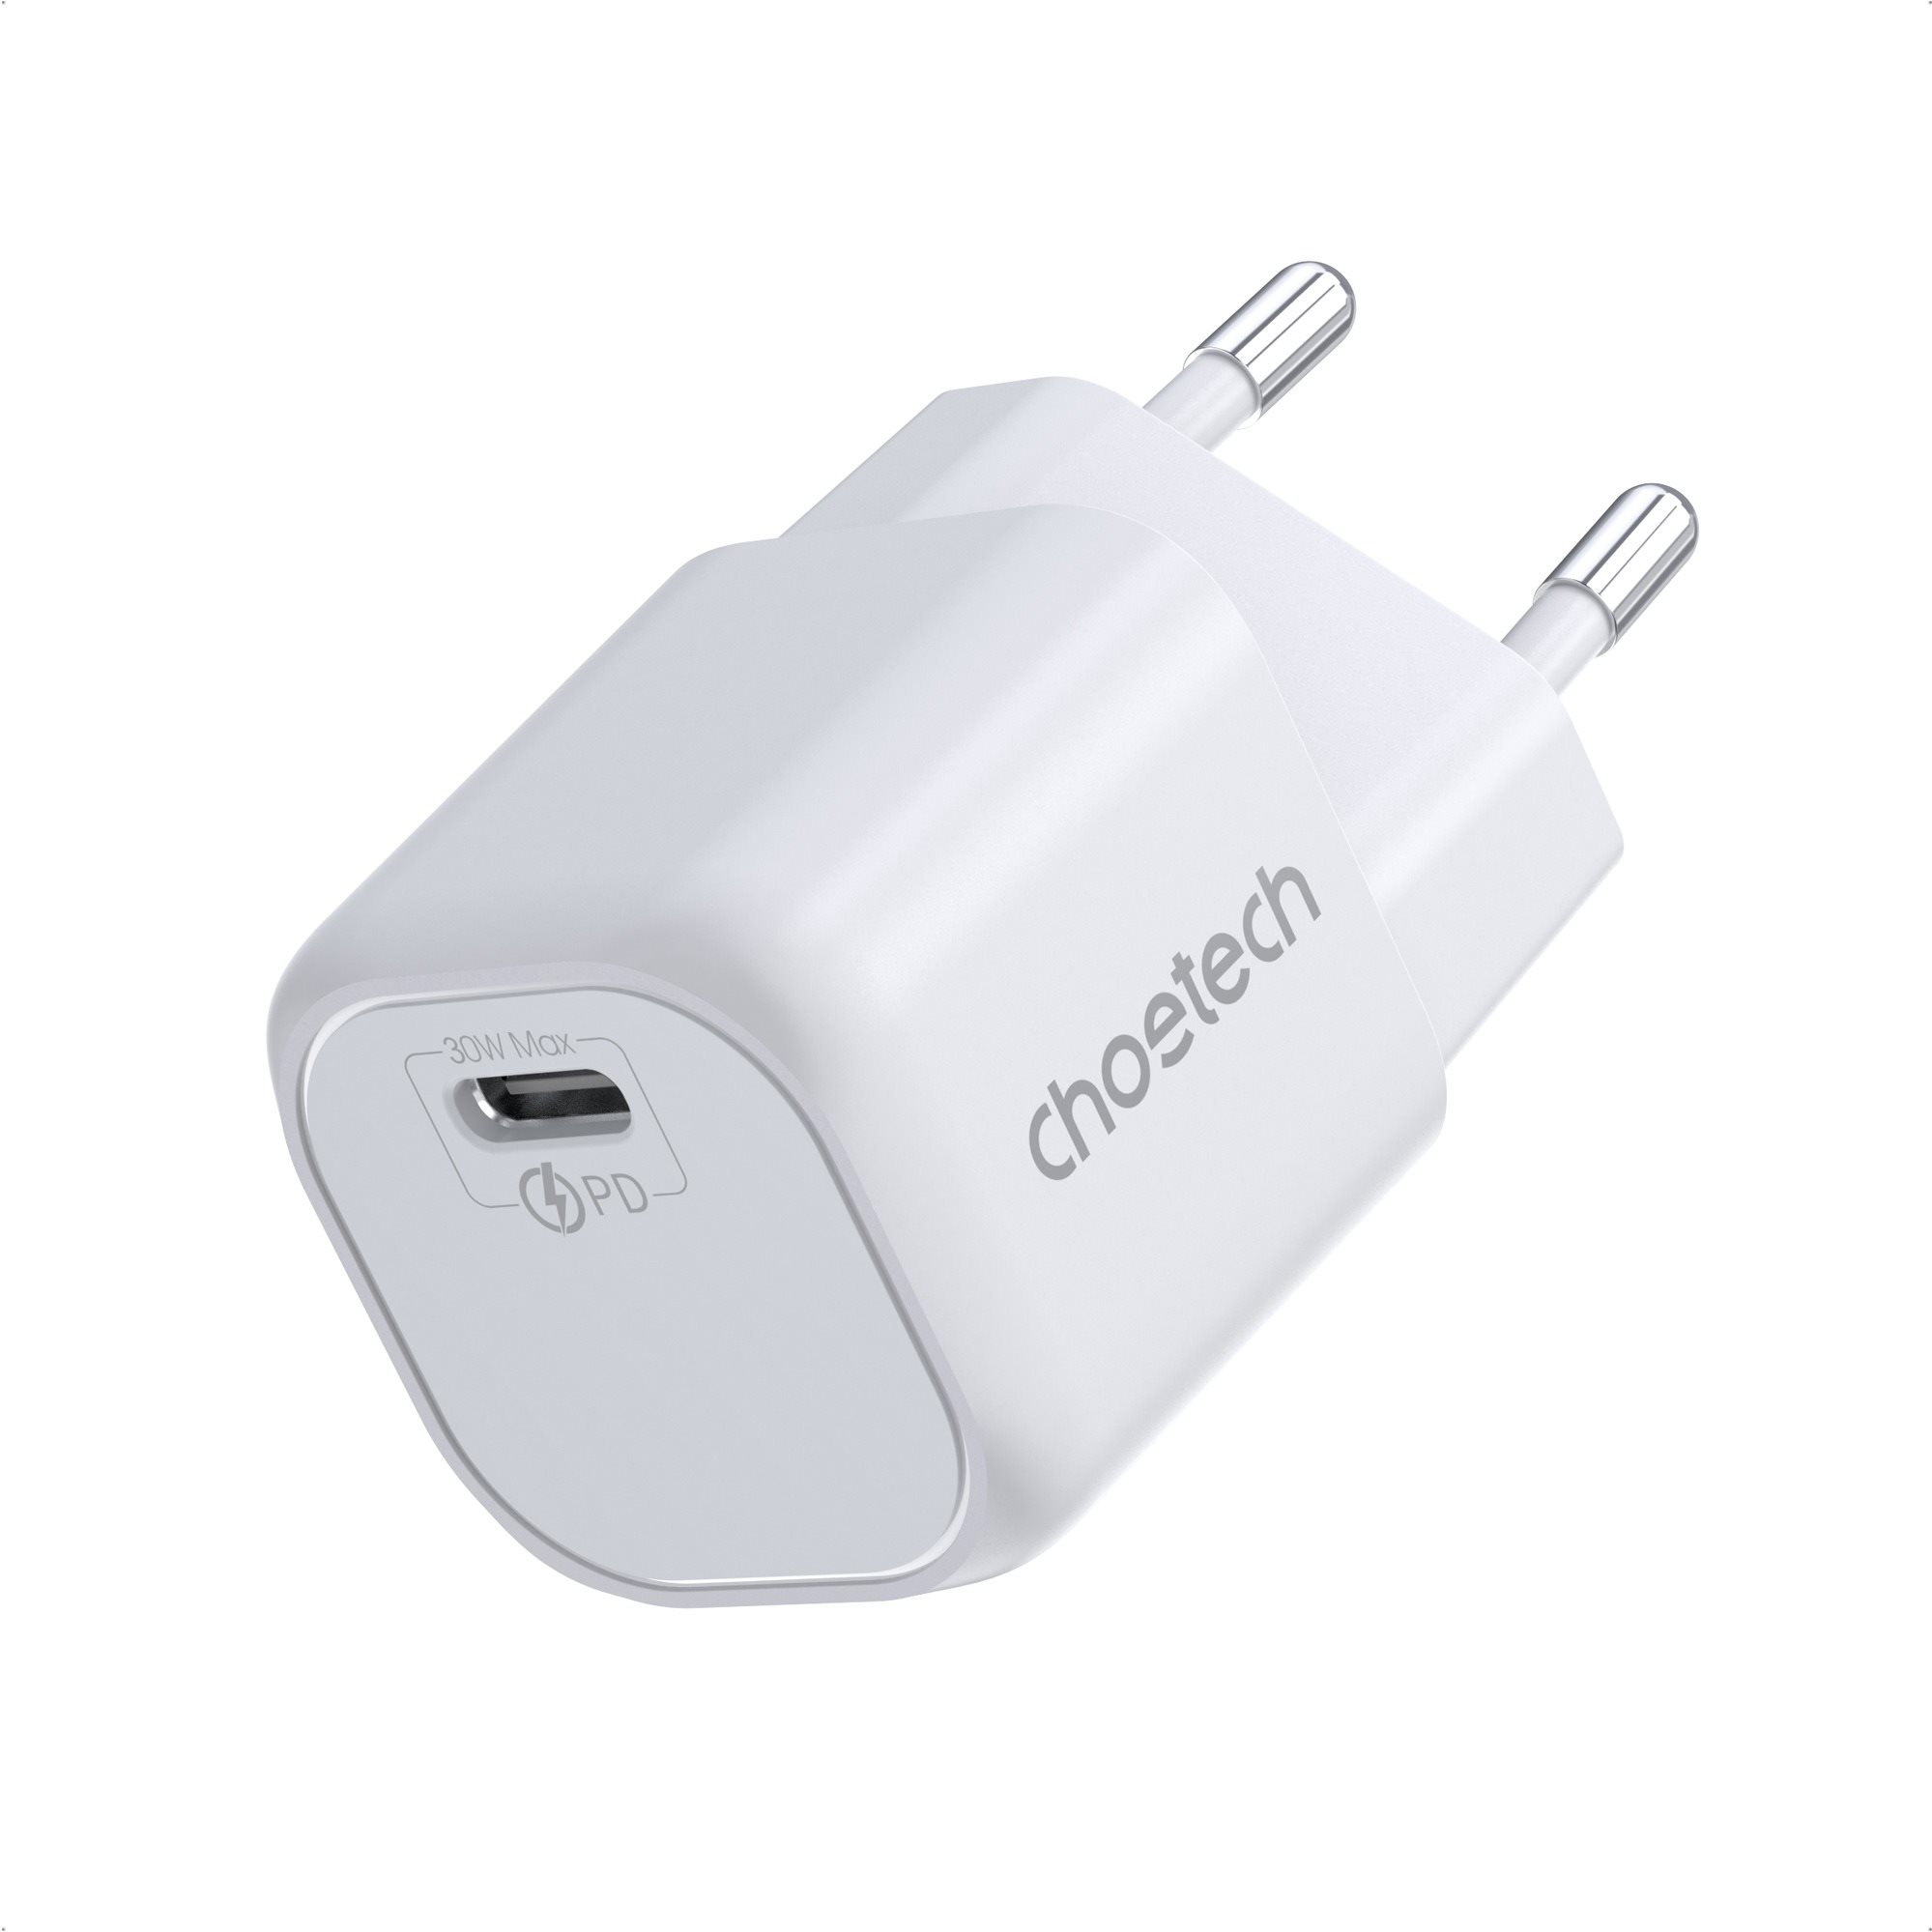 ChoeTech PD30W GAN Type-C Wall Charger - White